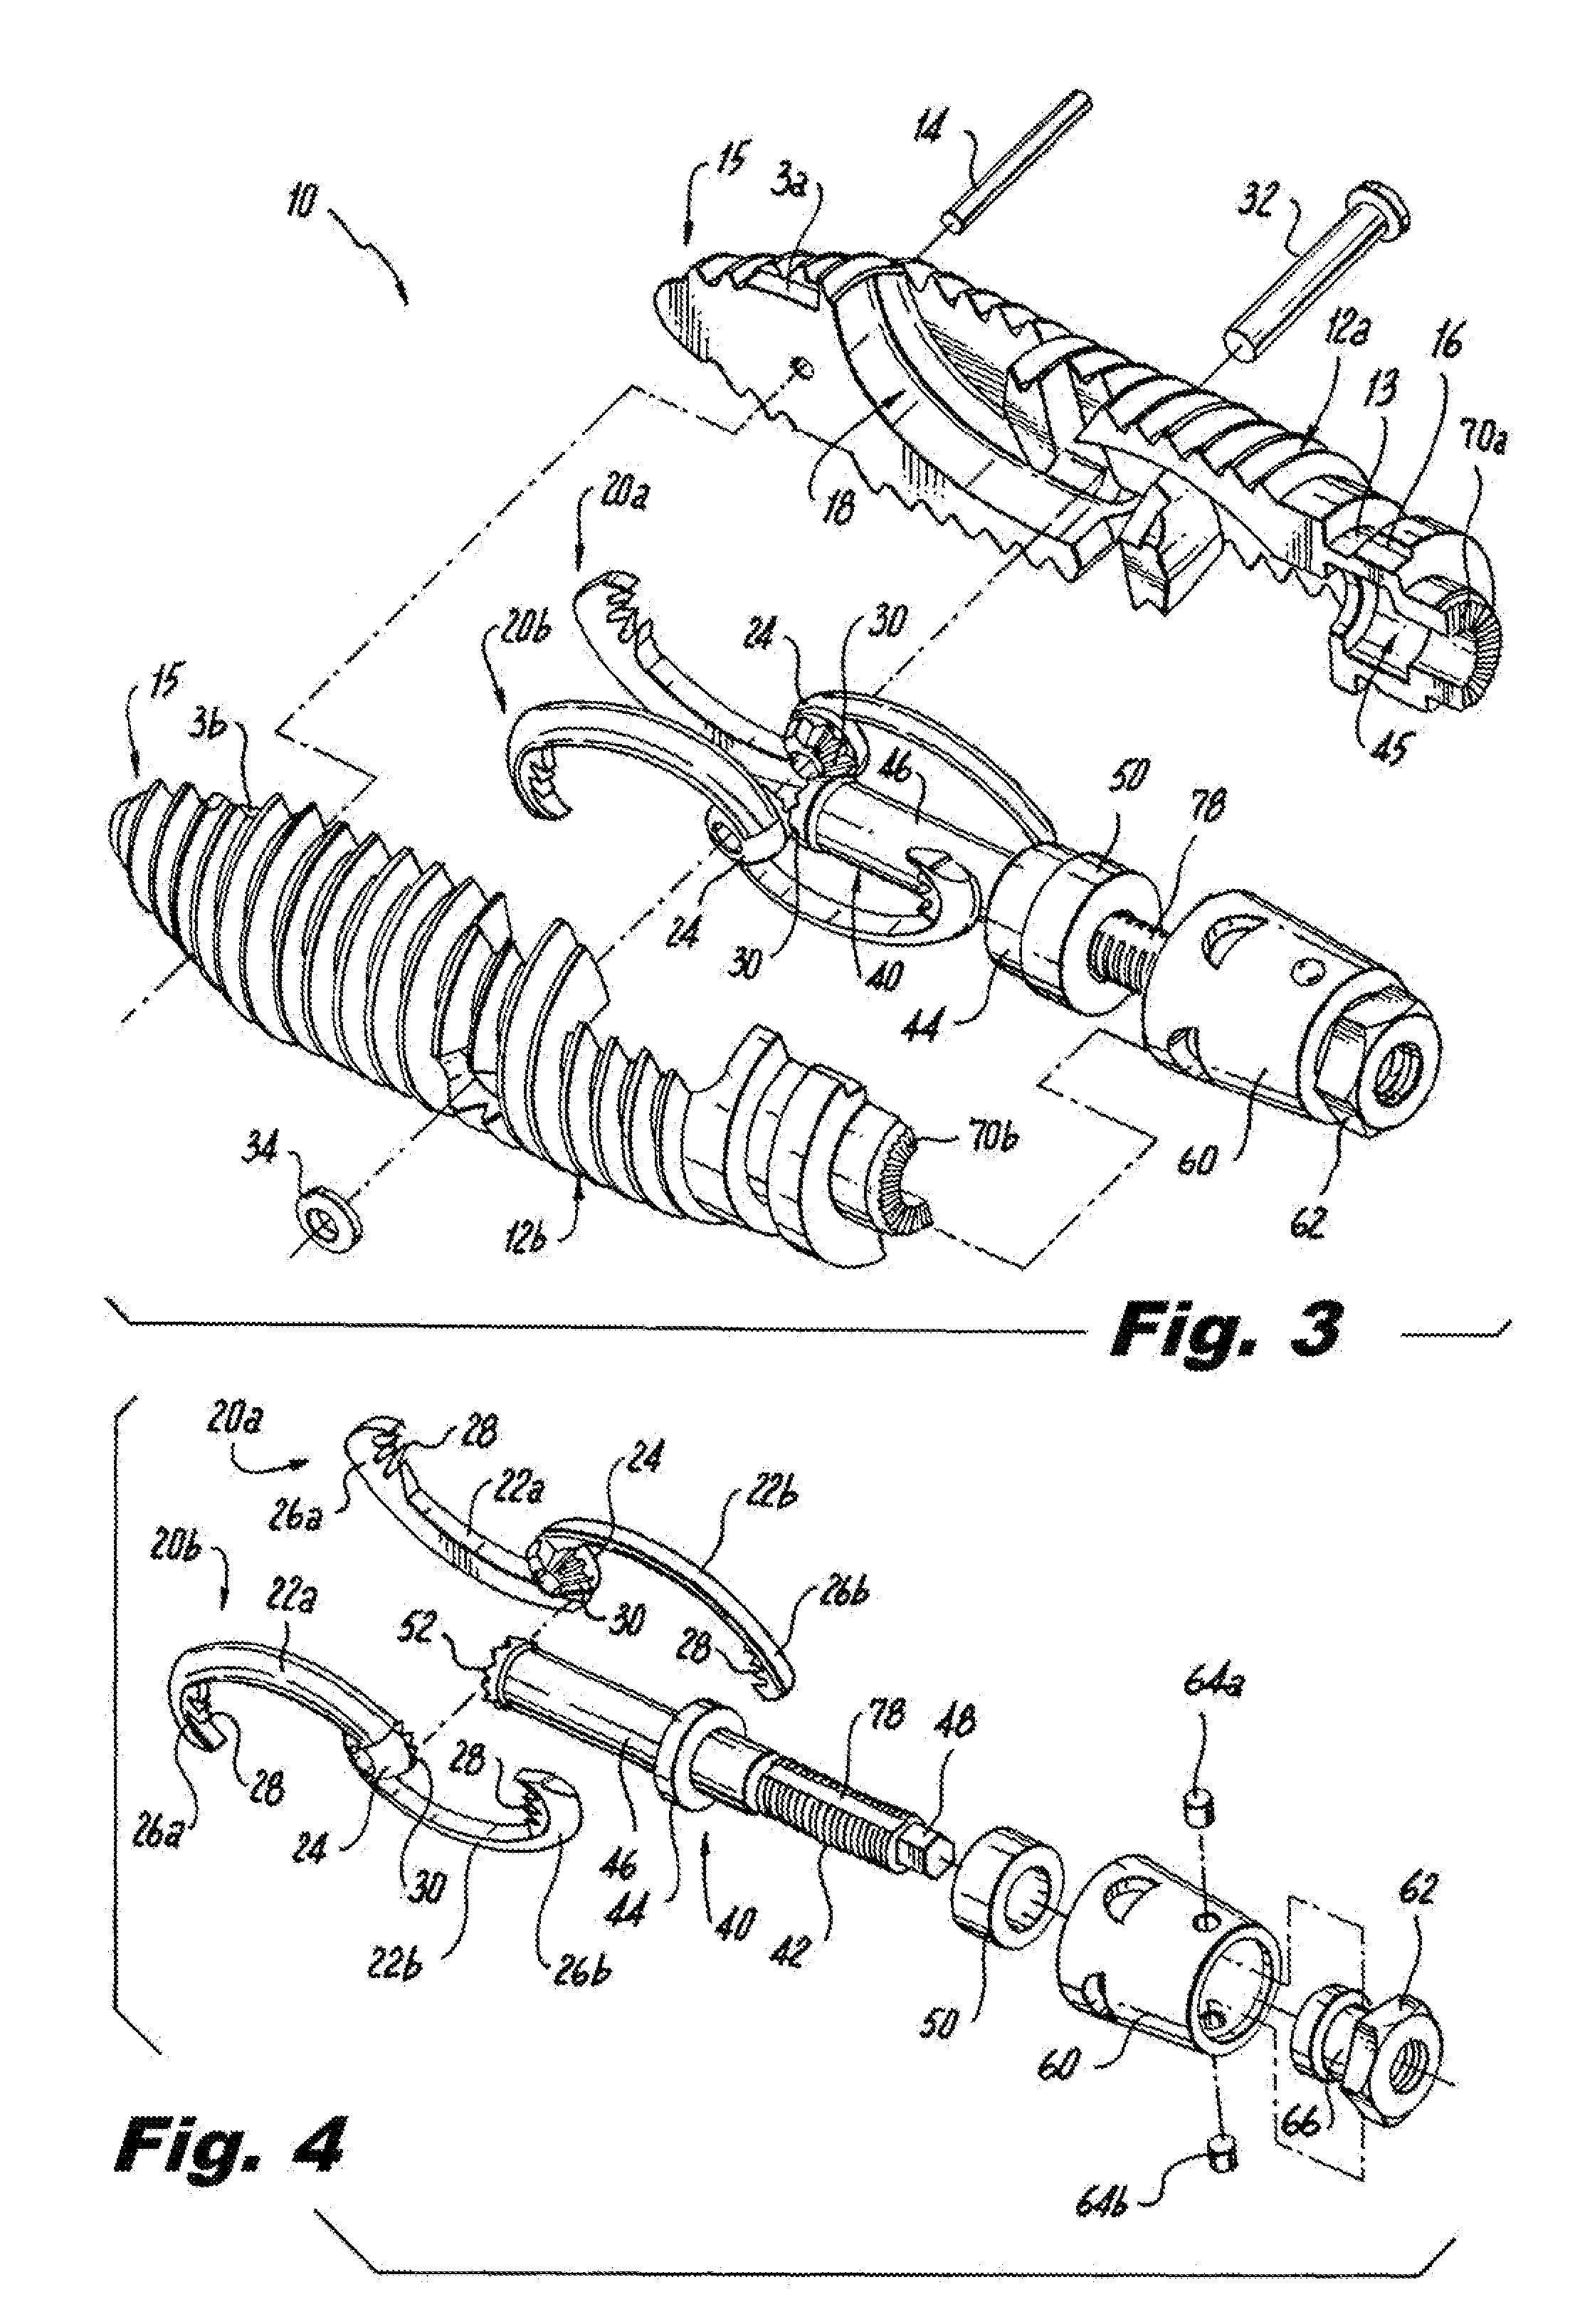 Interspinous process implants having deployable engagement arms